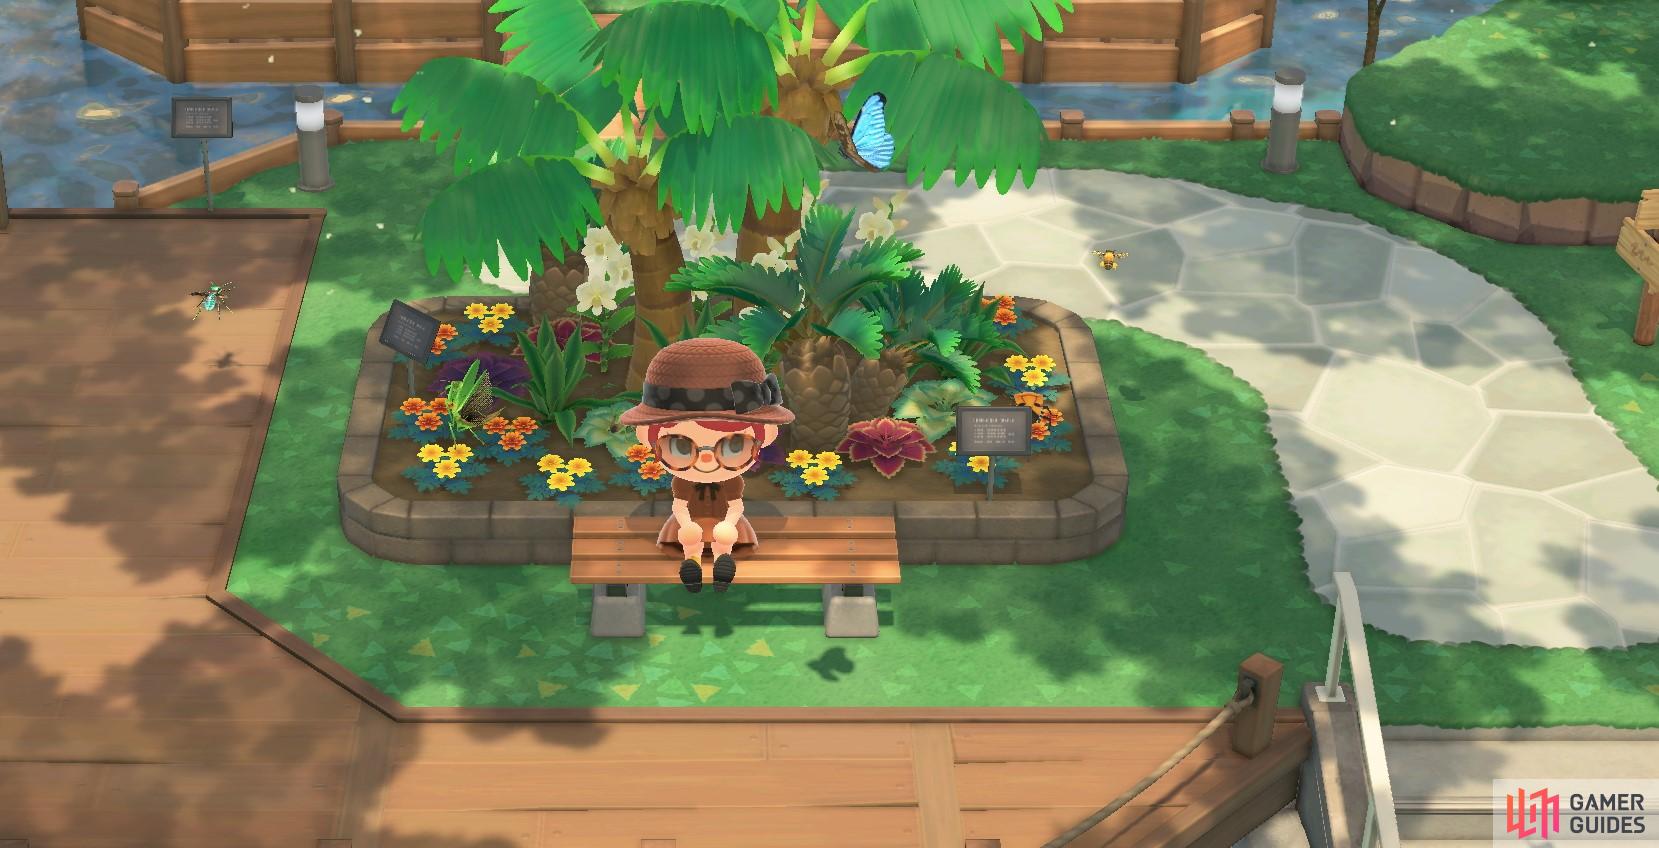 Don't forget to donate your newly found bugs to Blathers' museum.